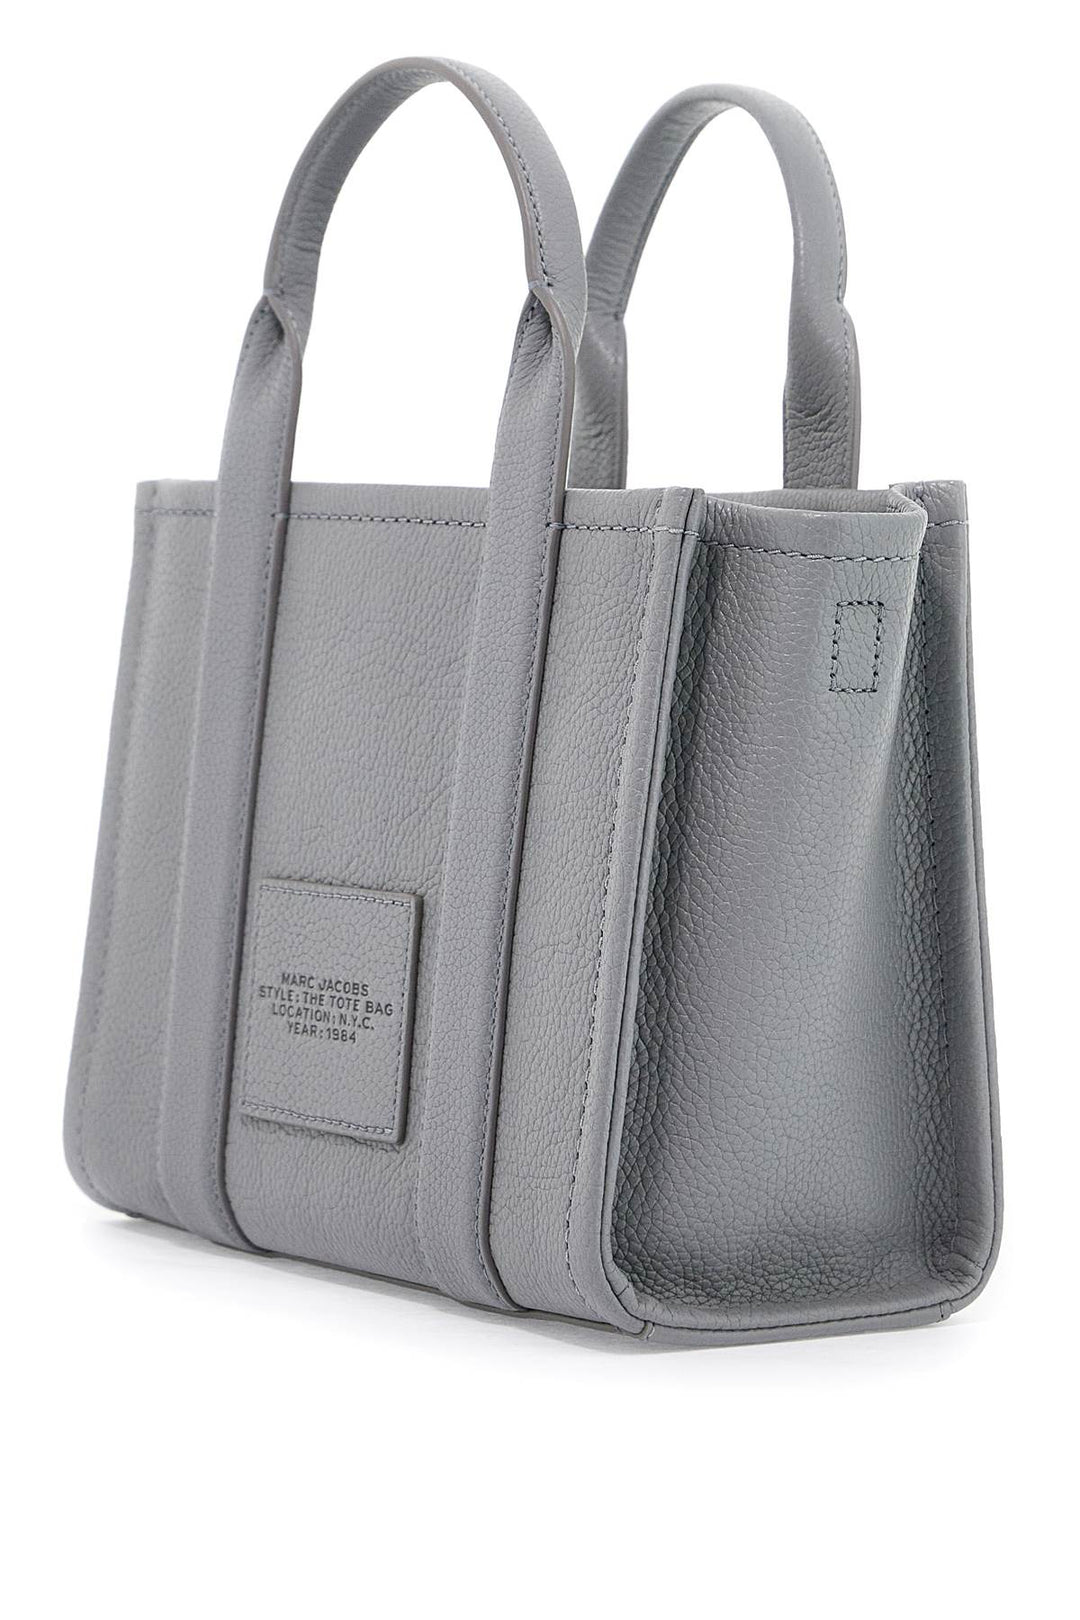 Marc Jacobs The Leather Small Tote Bag   Grey